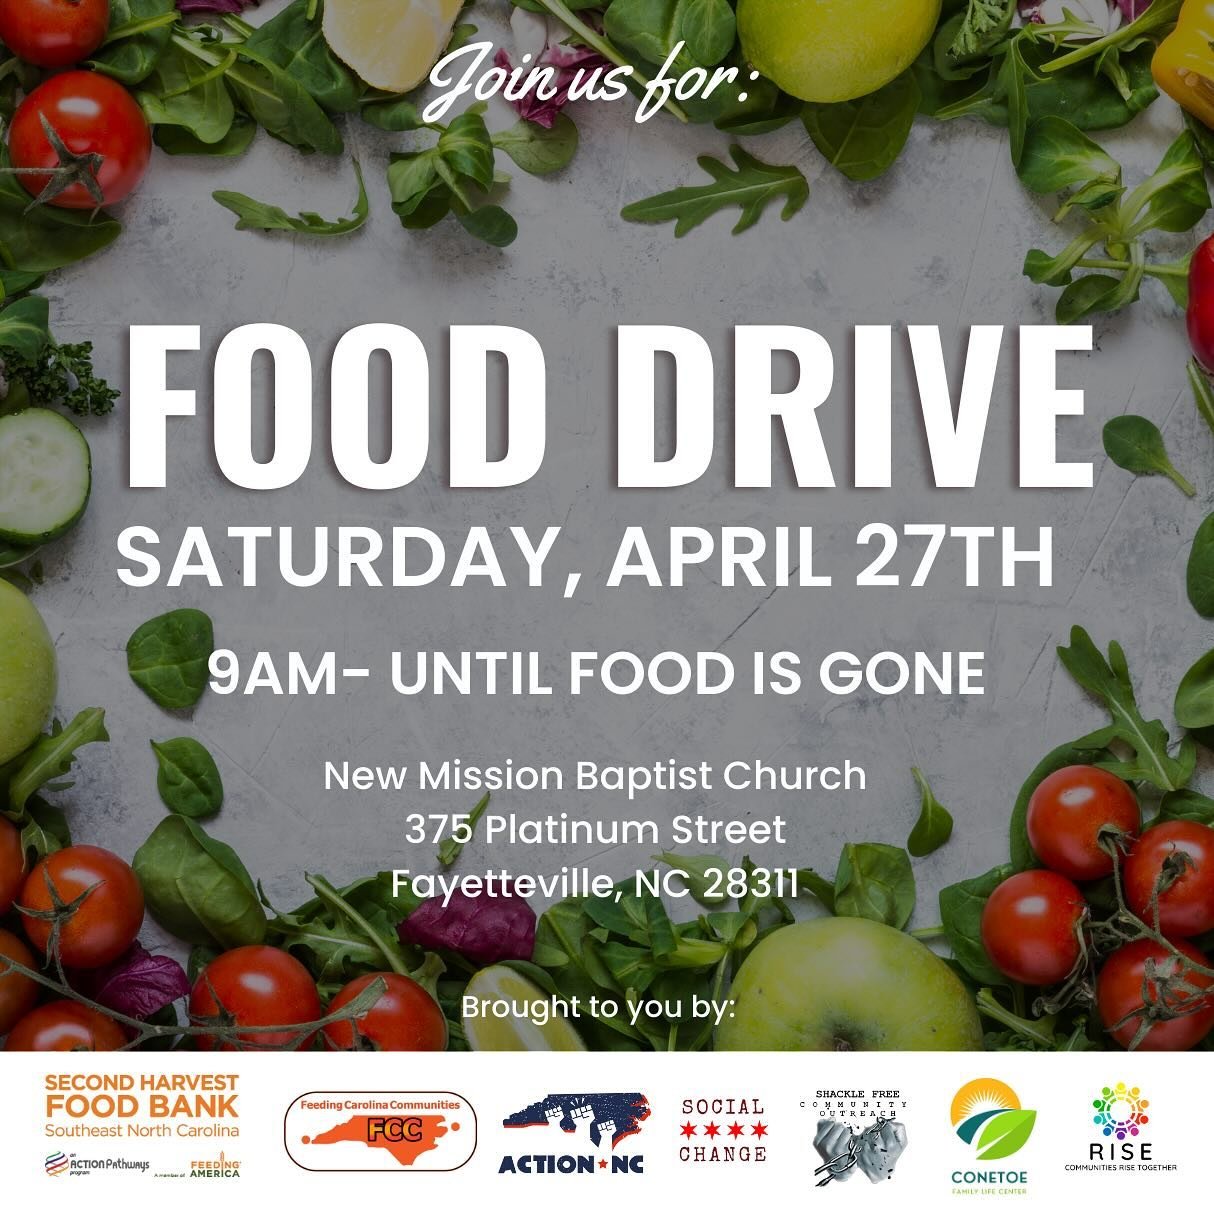 Join us for a community food drive! 

🗓️ Sat. April 27
⏰9am- food is gone
📍375 Platinum Street Fayetteville NC

Brought to you by: @shacklefreeinformational @conetoefamilyfarm @action.nc @rise4all_org @ncsocialchange 

#socialchange #fooddrive #foo